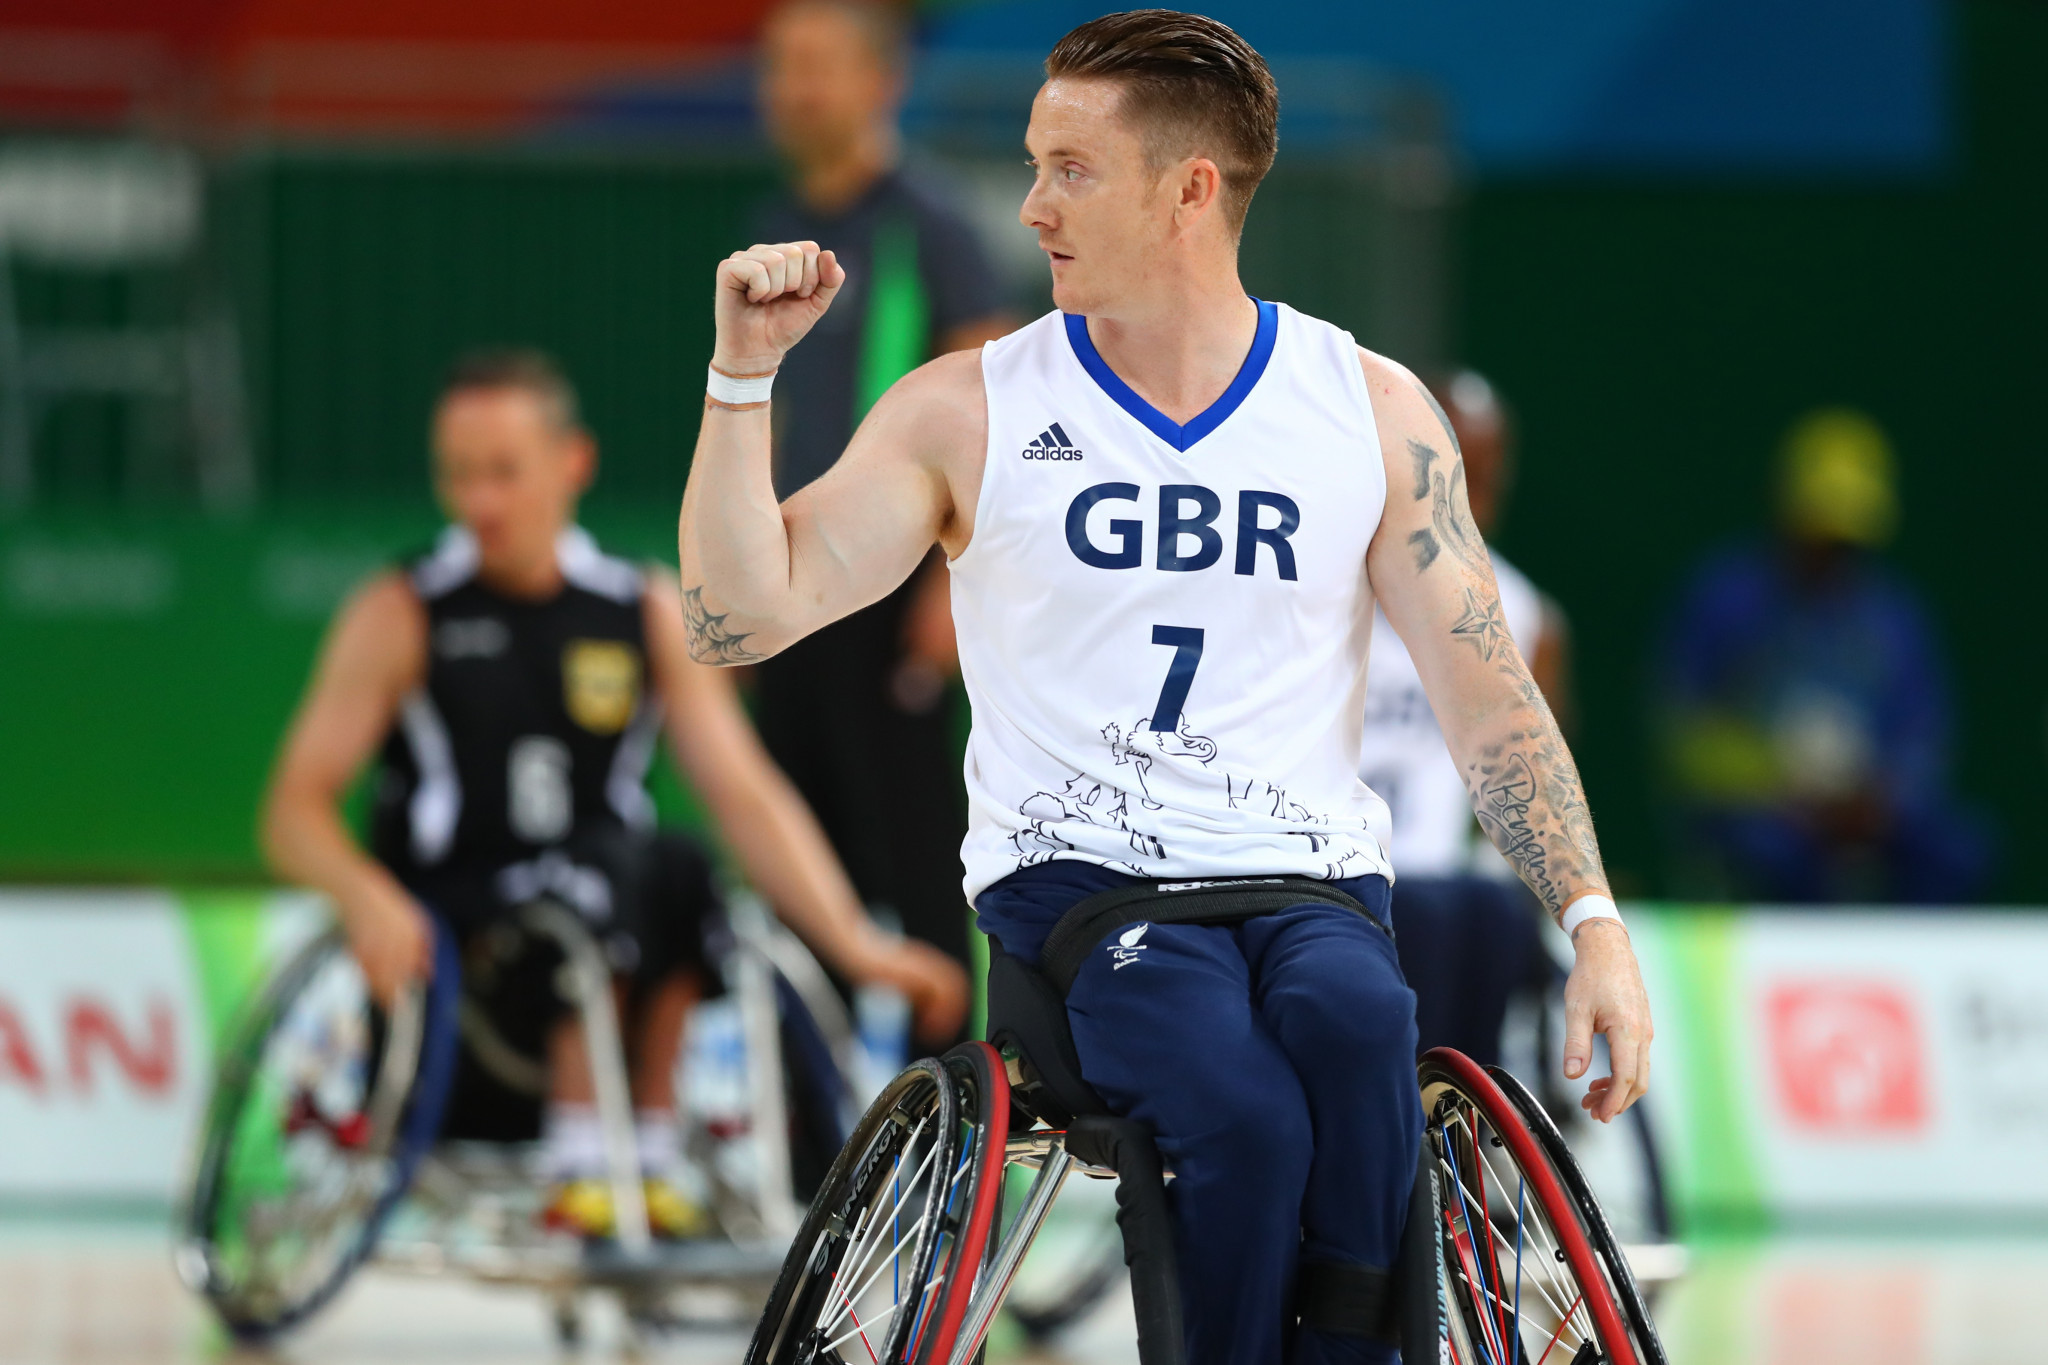 World champion Bywater replaces De Rooij on IWBF Athlete Steering Committee